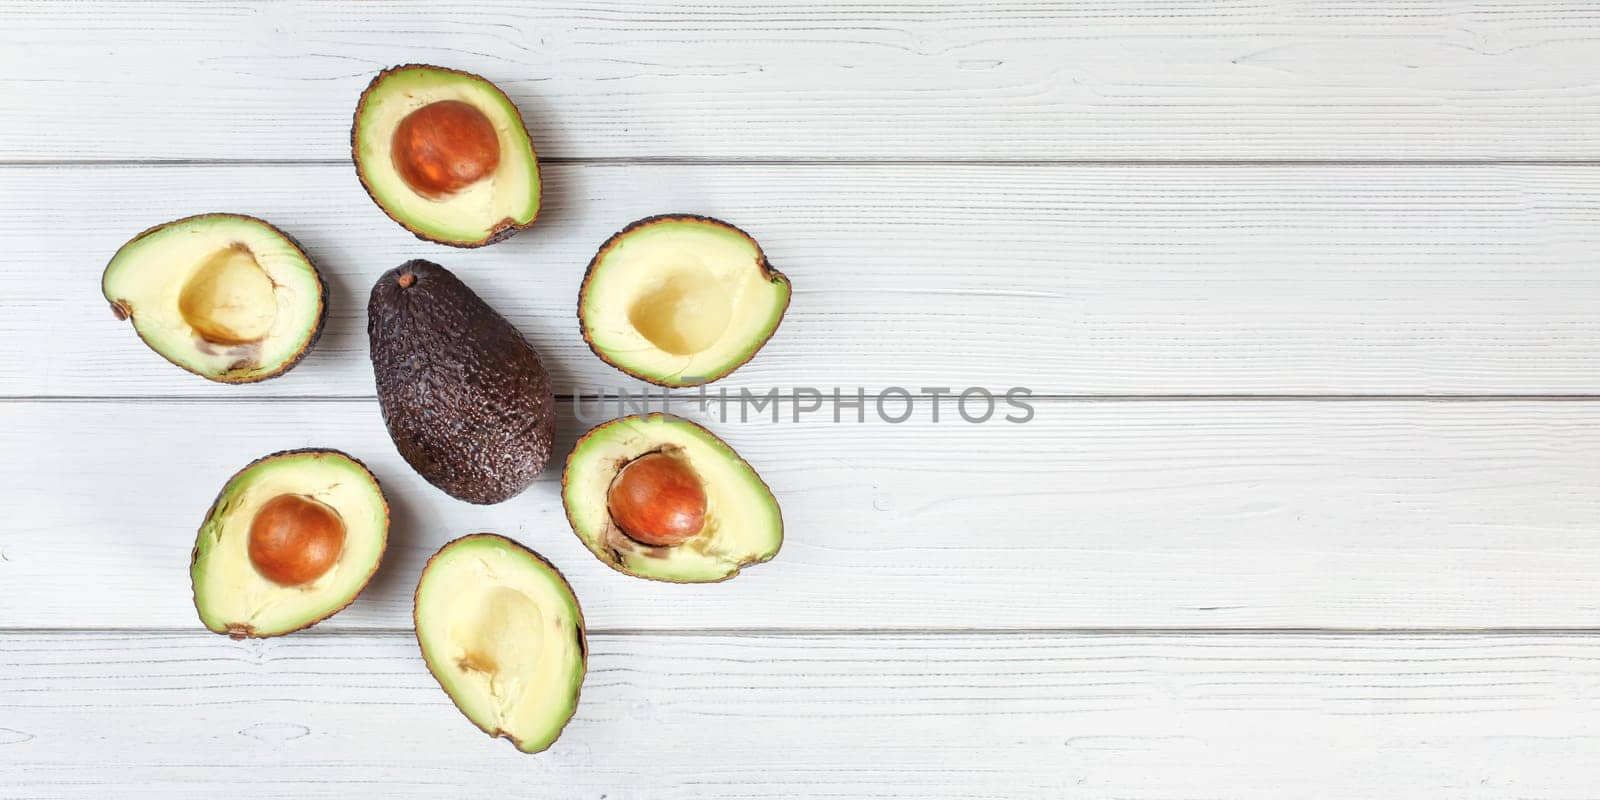 Ripe avocado halves arranged around whole dark brown pear (hass / bilse fruit variety) on white boards desk, banner with space for text right